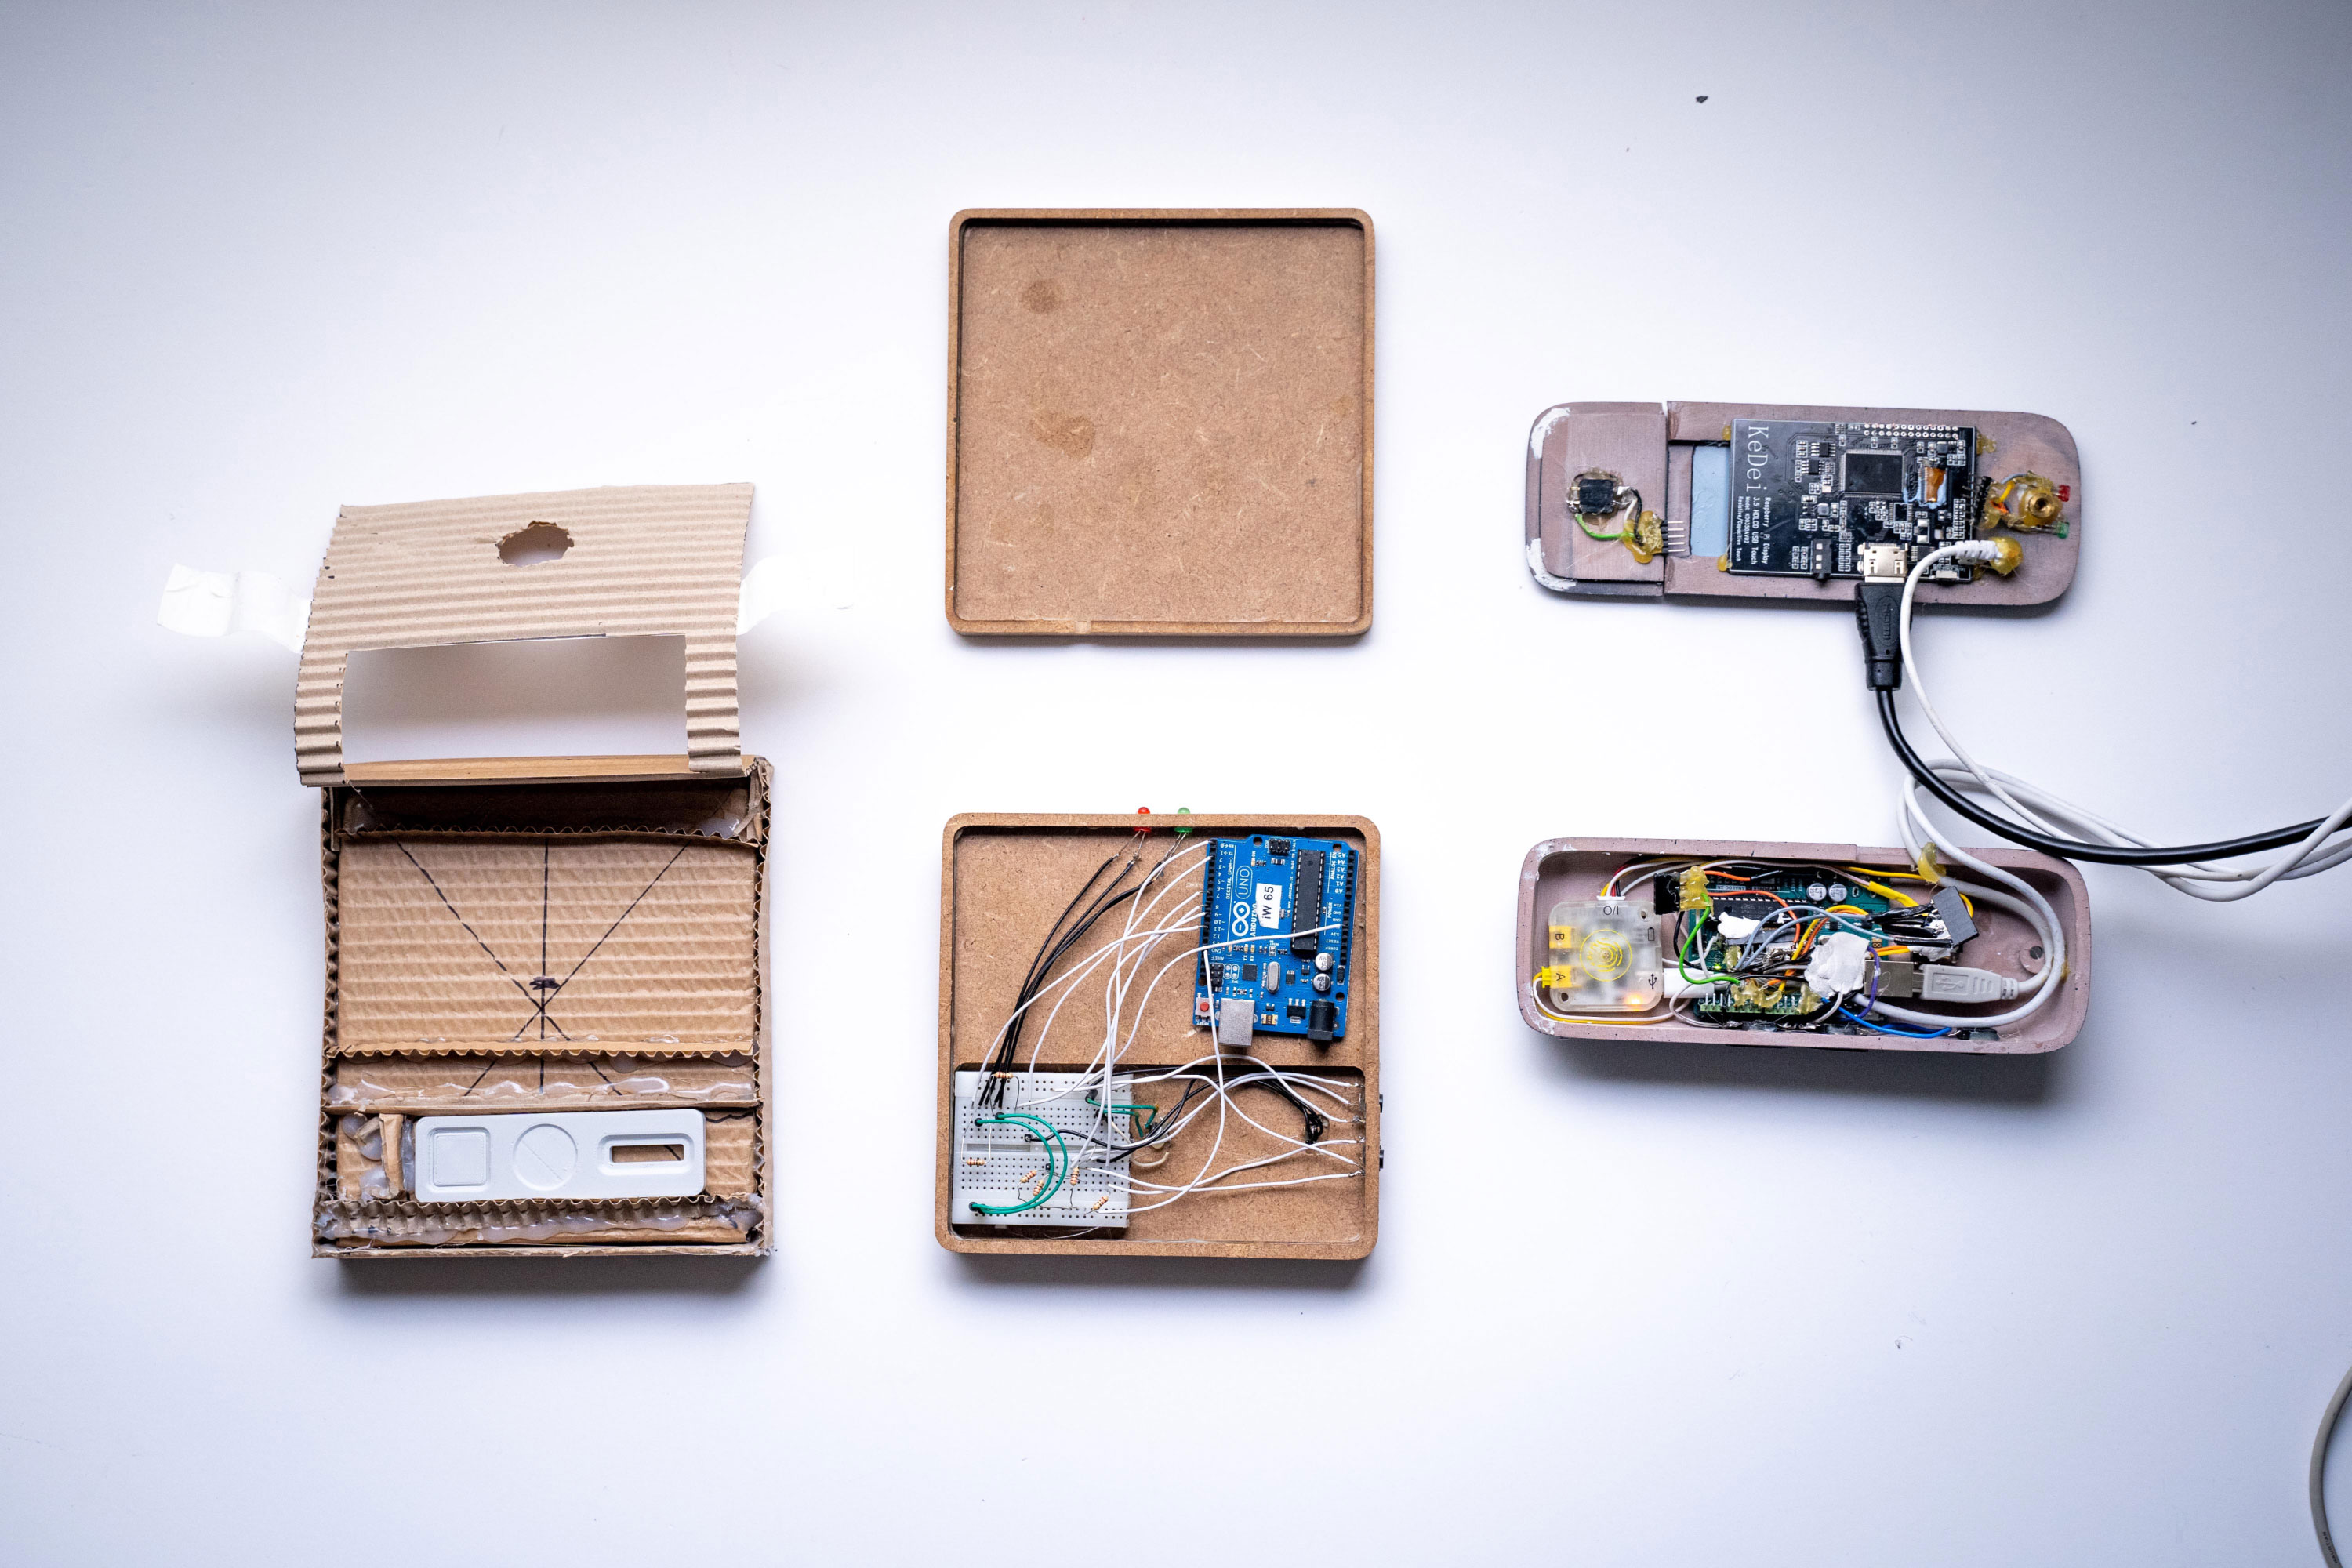 An image of different prototypes of the project.